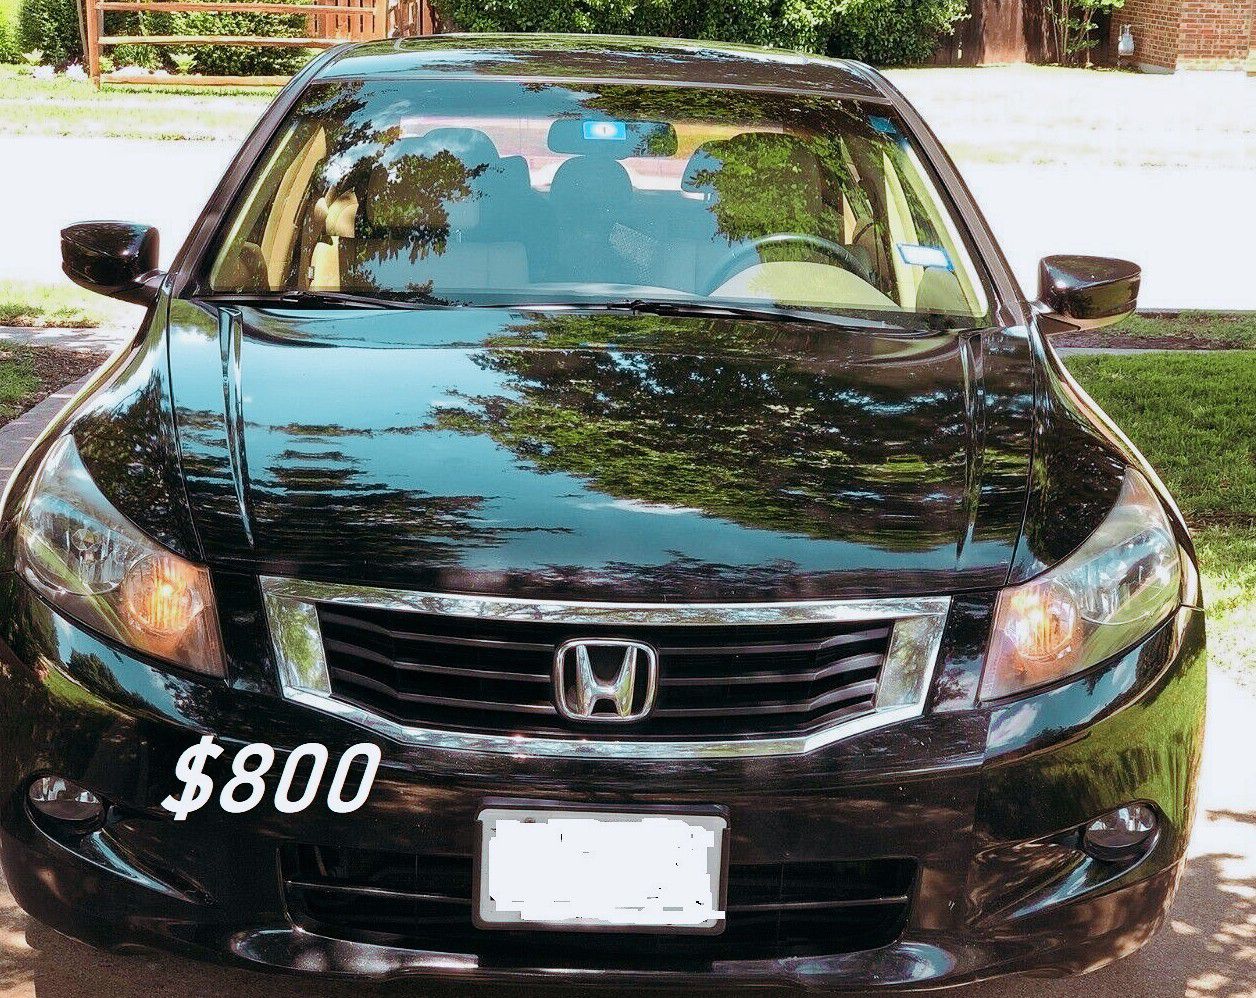 ✅✅💝💲8️OO URGENTLY I'm seling my family car 2OO9 Honda Accord Sedan Super cute and clean in and out.✅✅💕